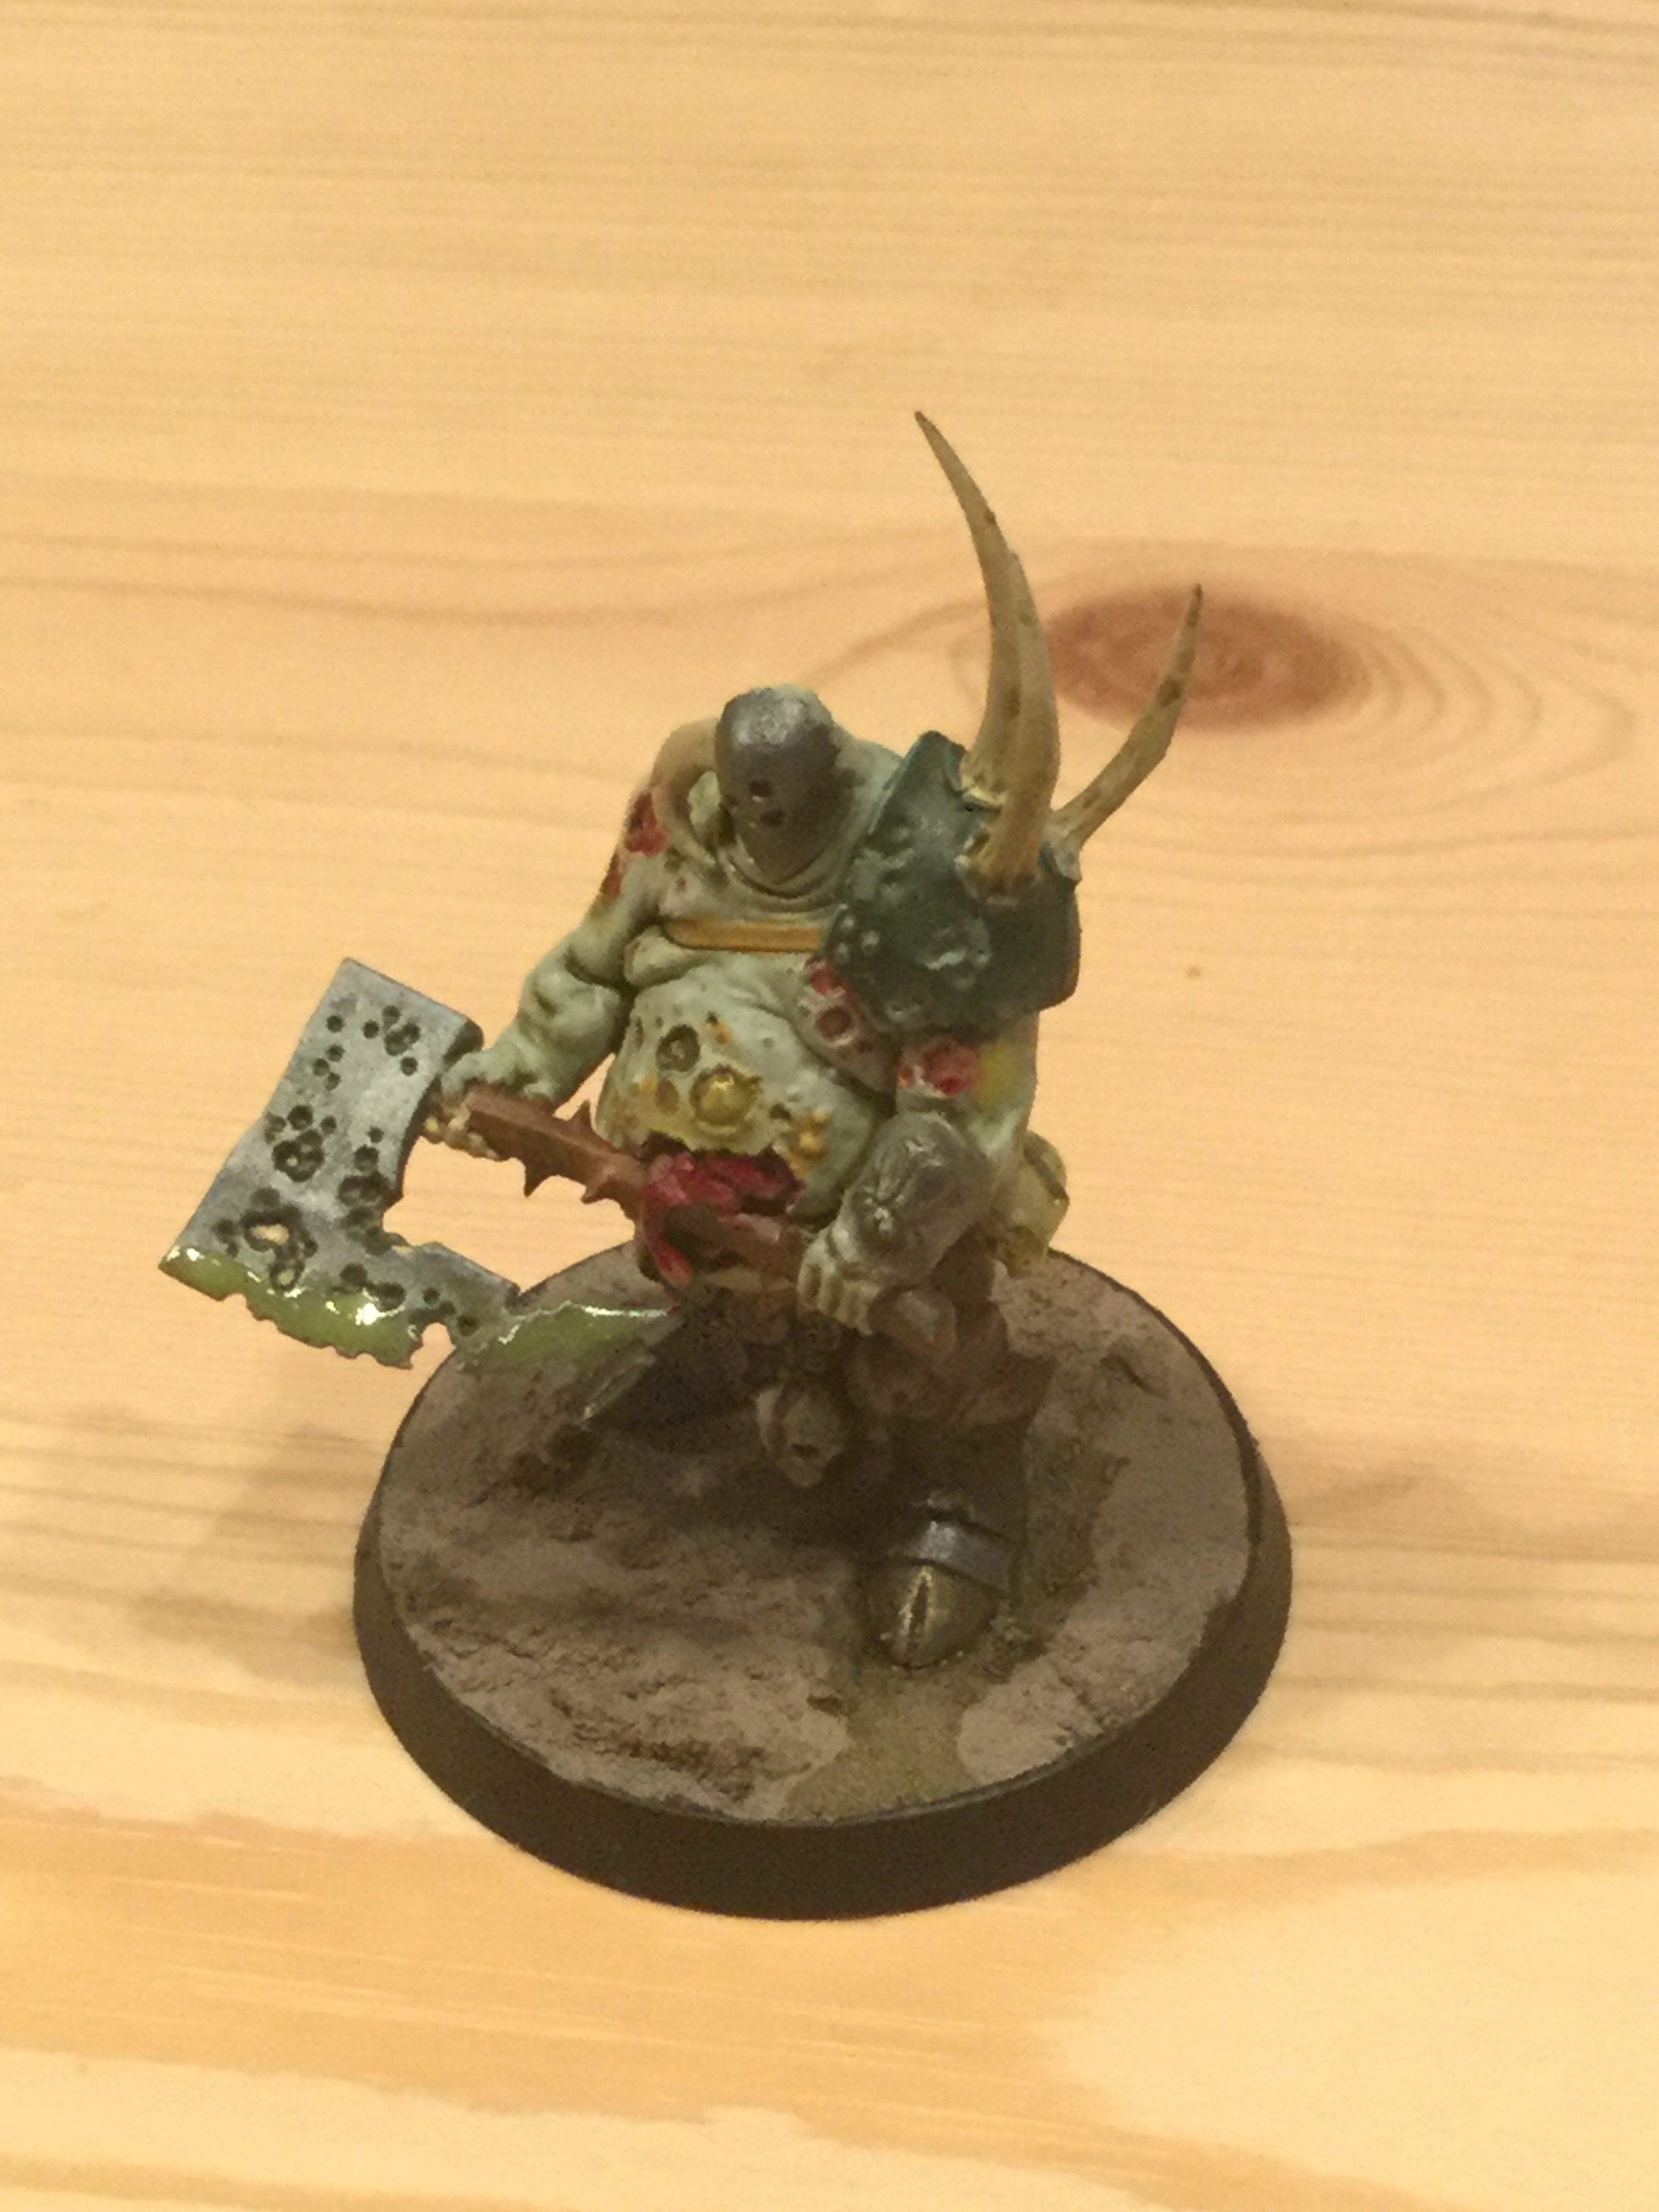 Chaos - Nurgle Lord of Plagues [Age of Sigmar]